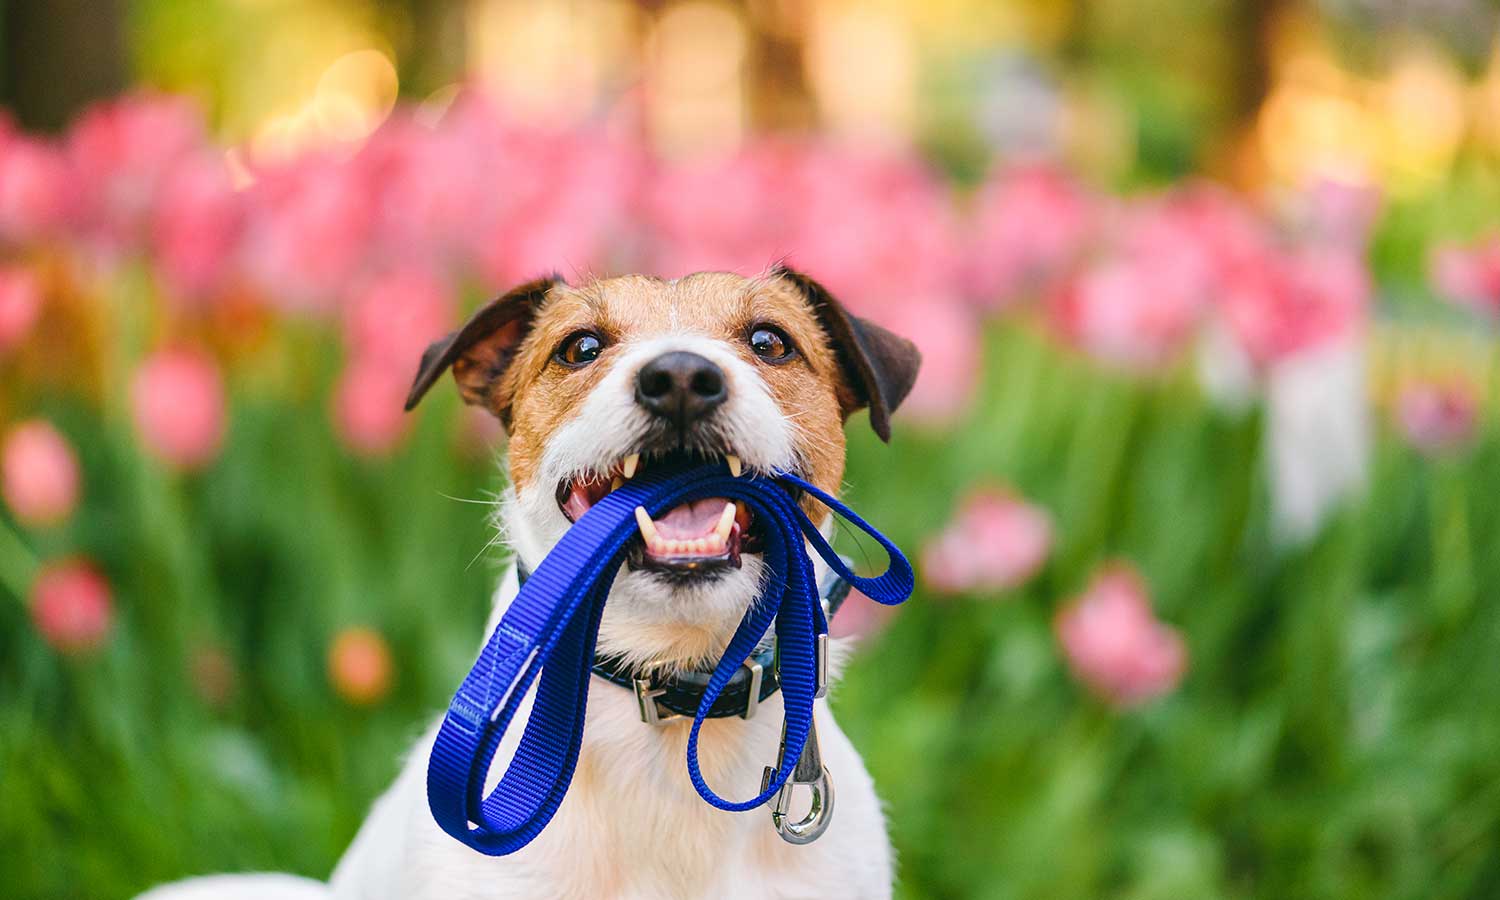 A Jack Russell Terrier with a leash